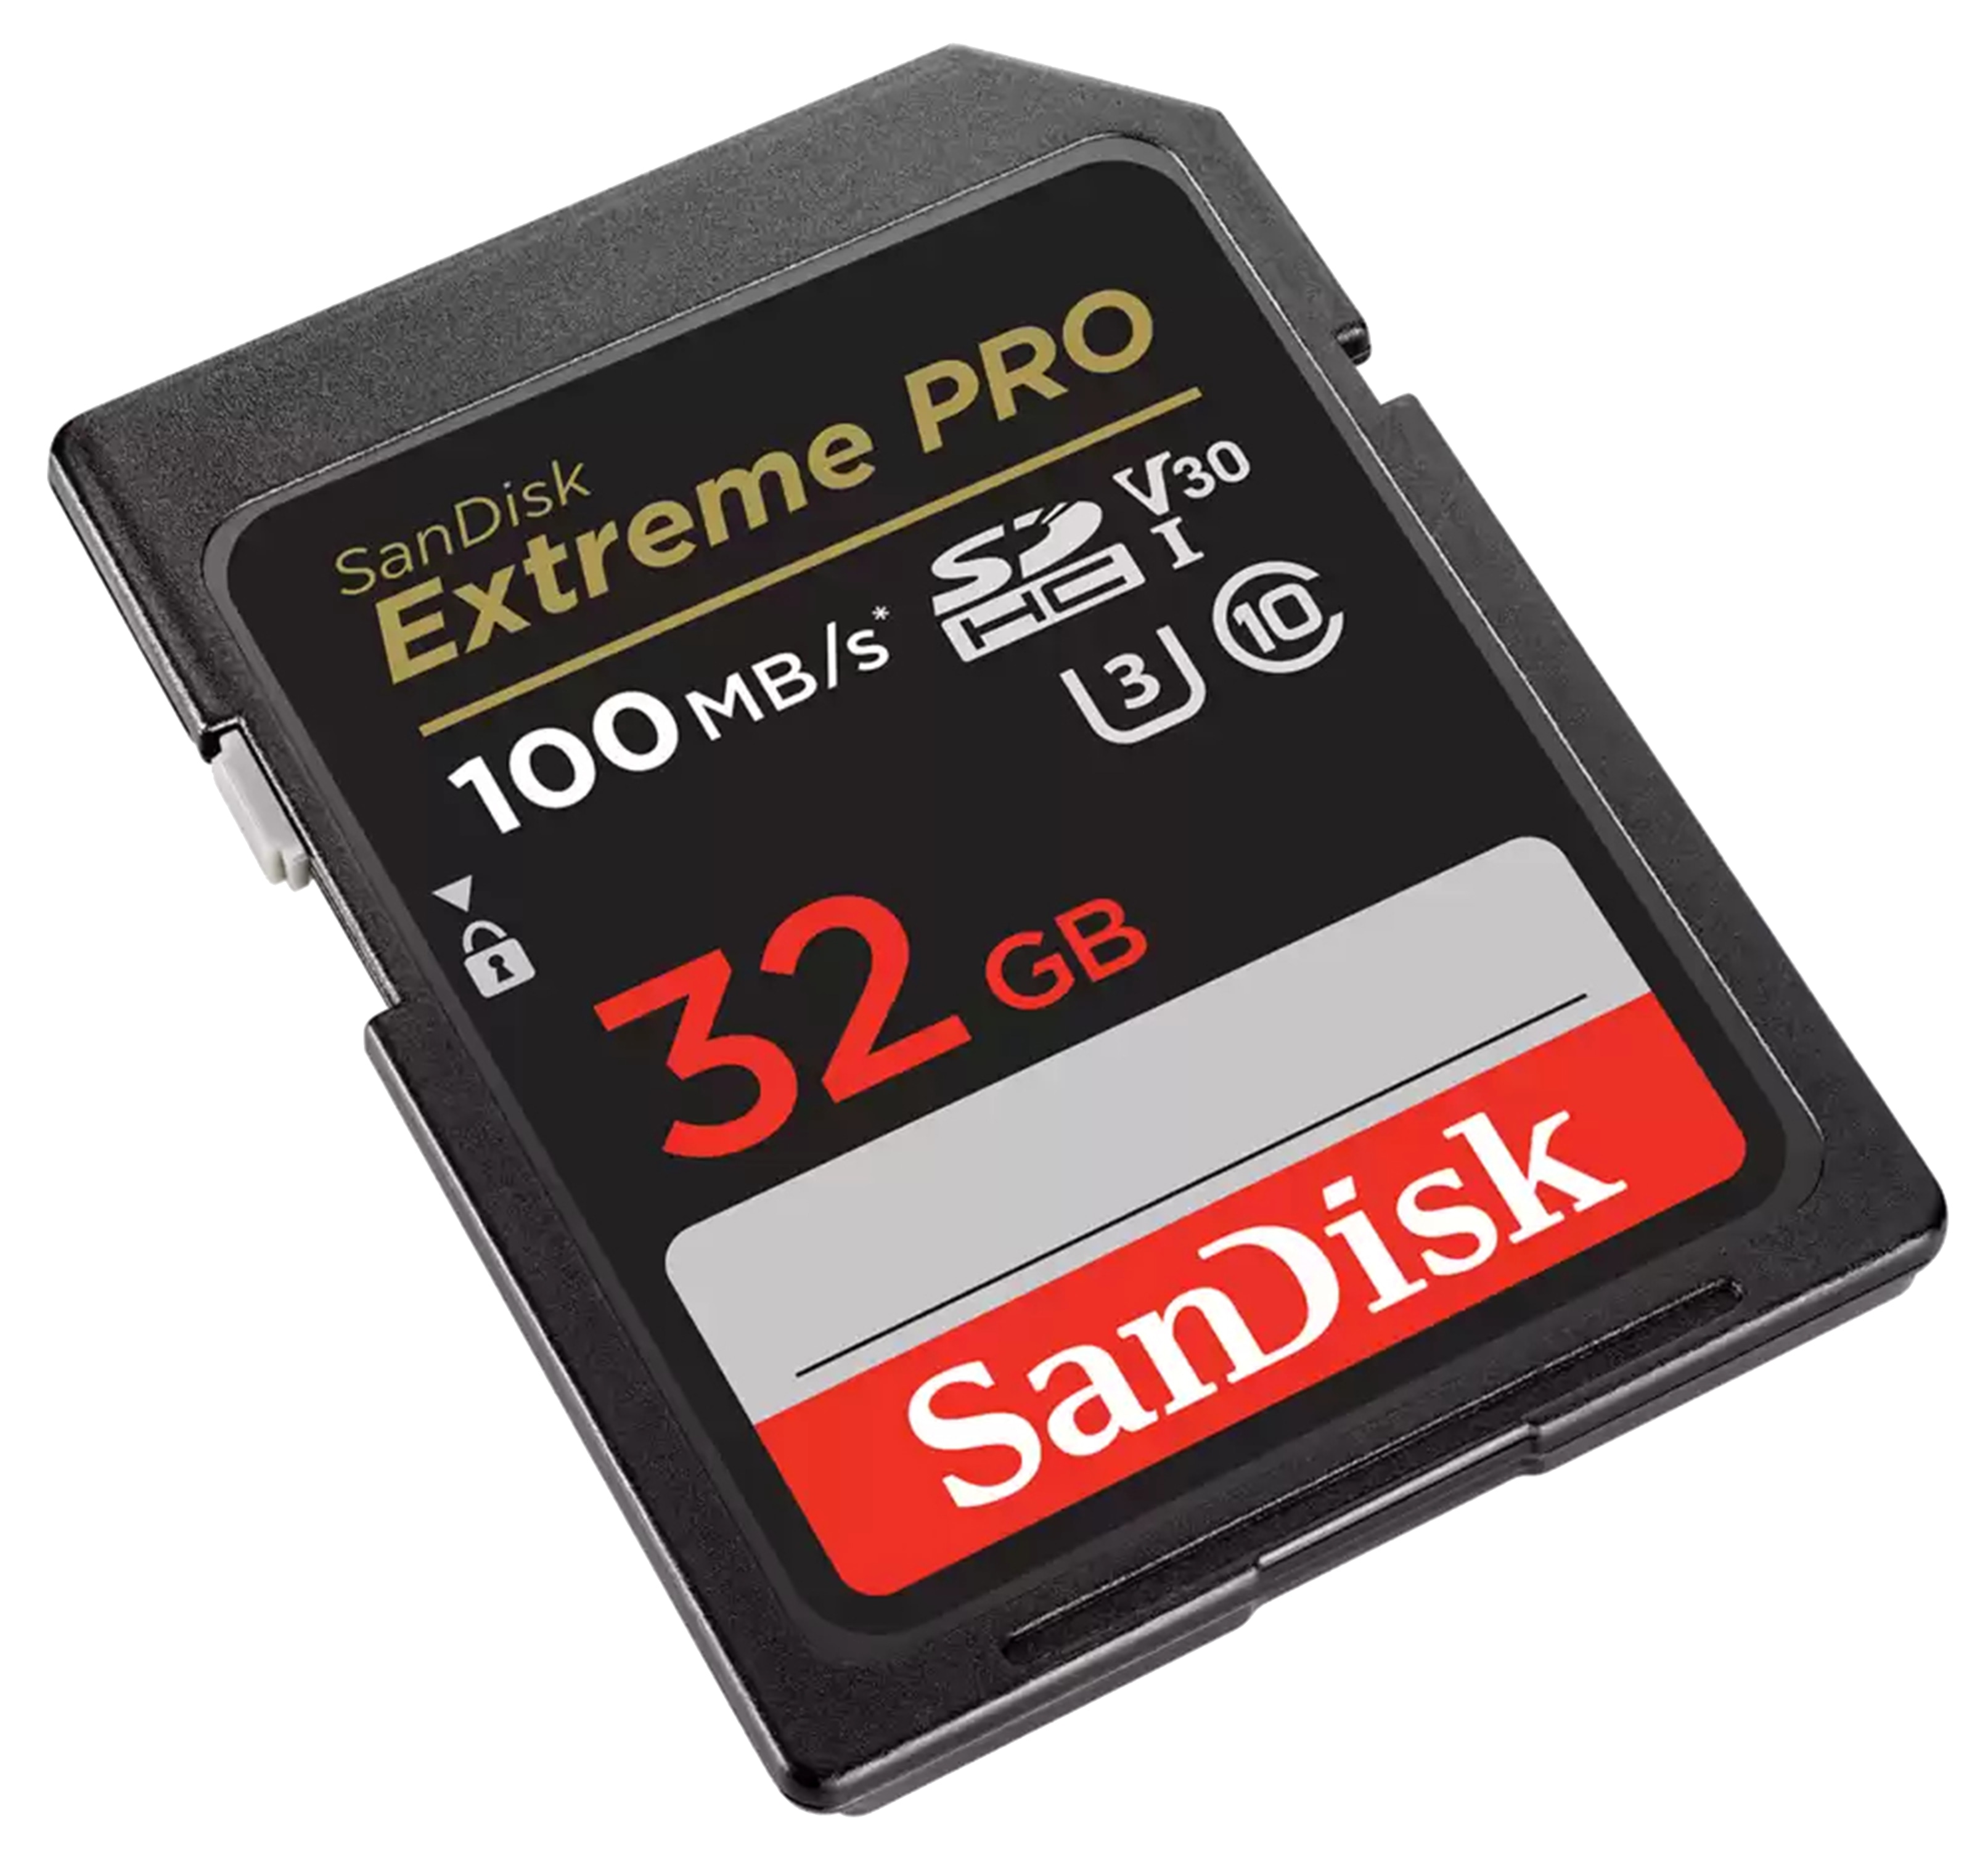 SANDISK SD-Card Extreme Pro 32GB